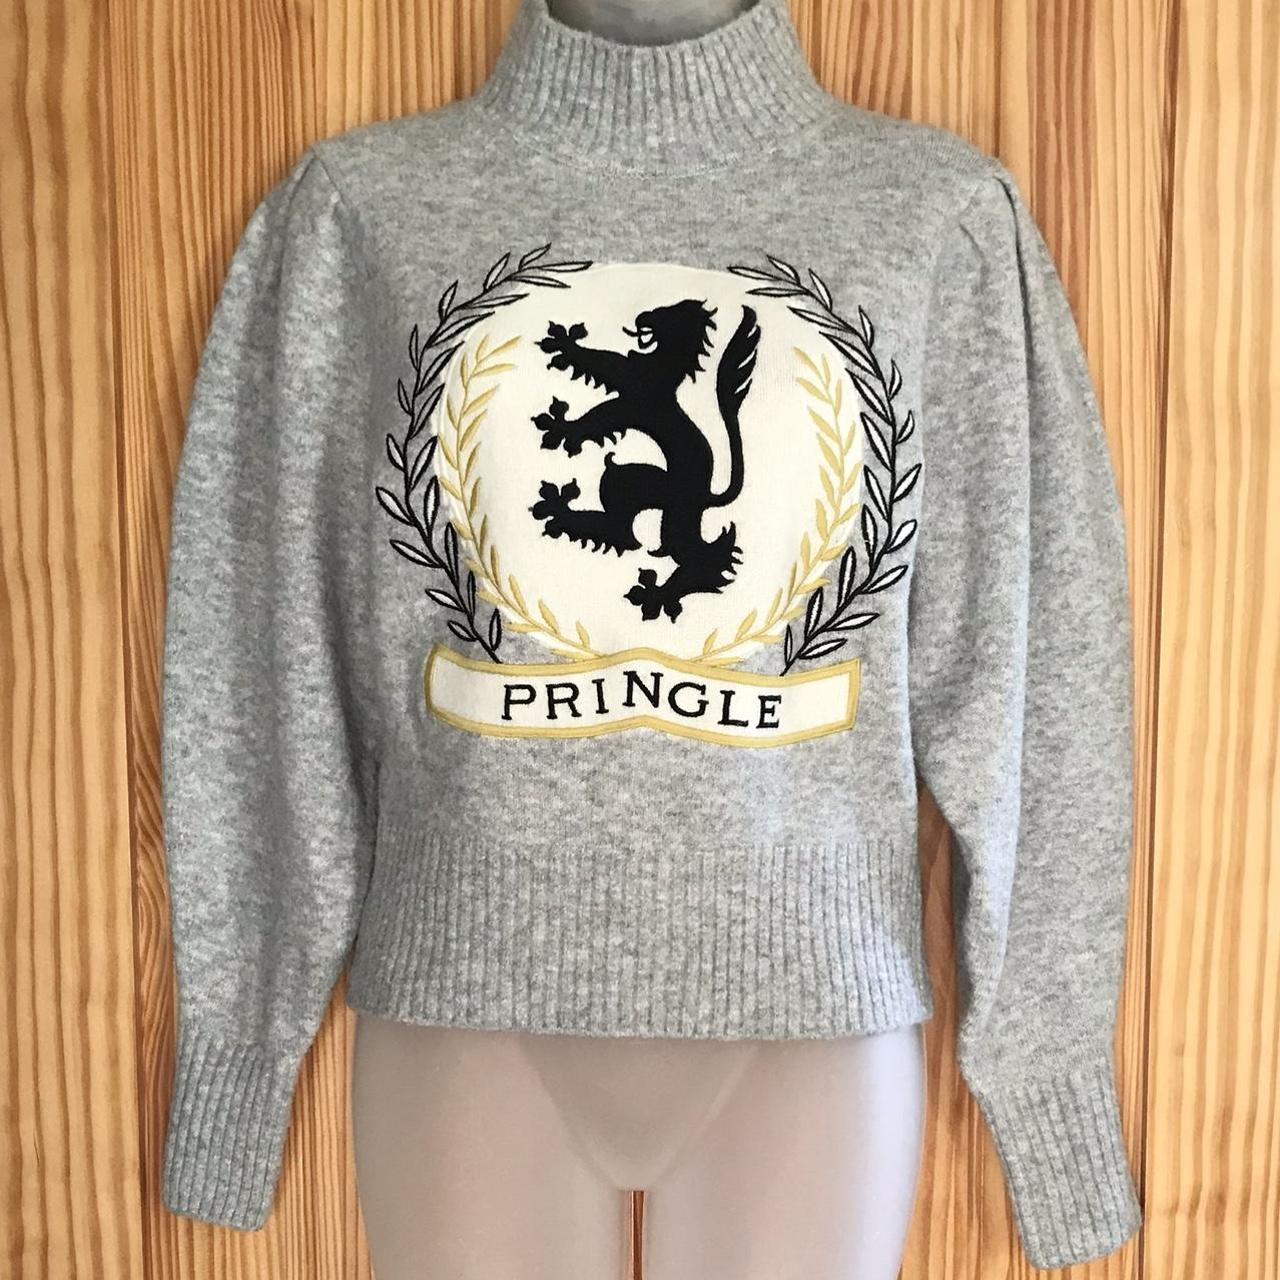 Pringle Women's Grey and Yellow Jumper